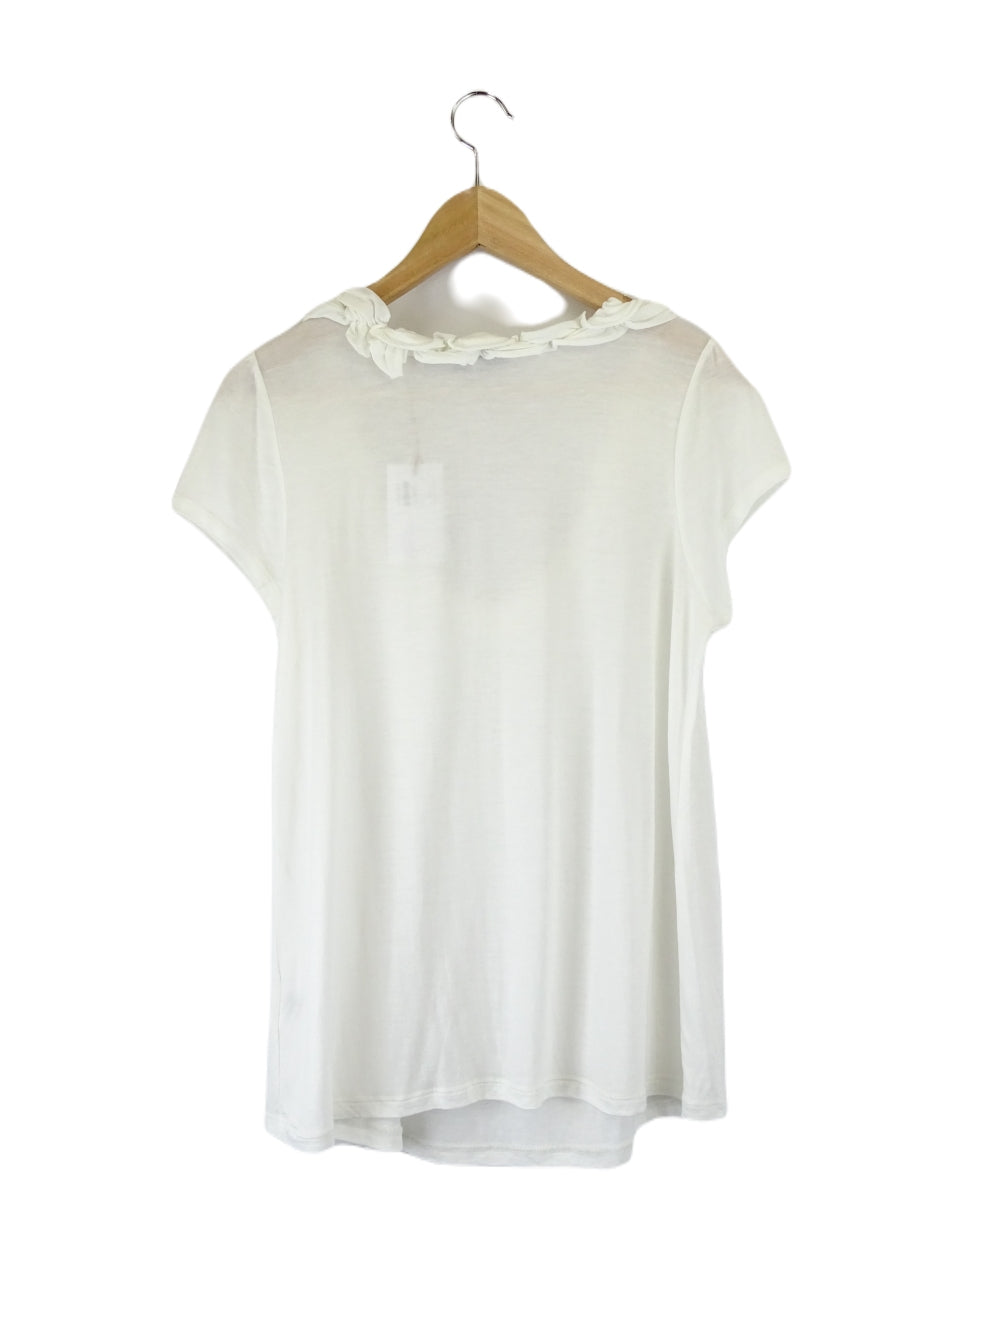 Sussan White Top S